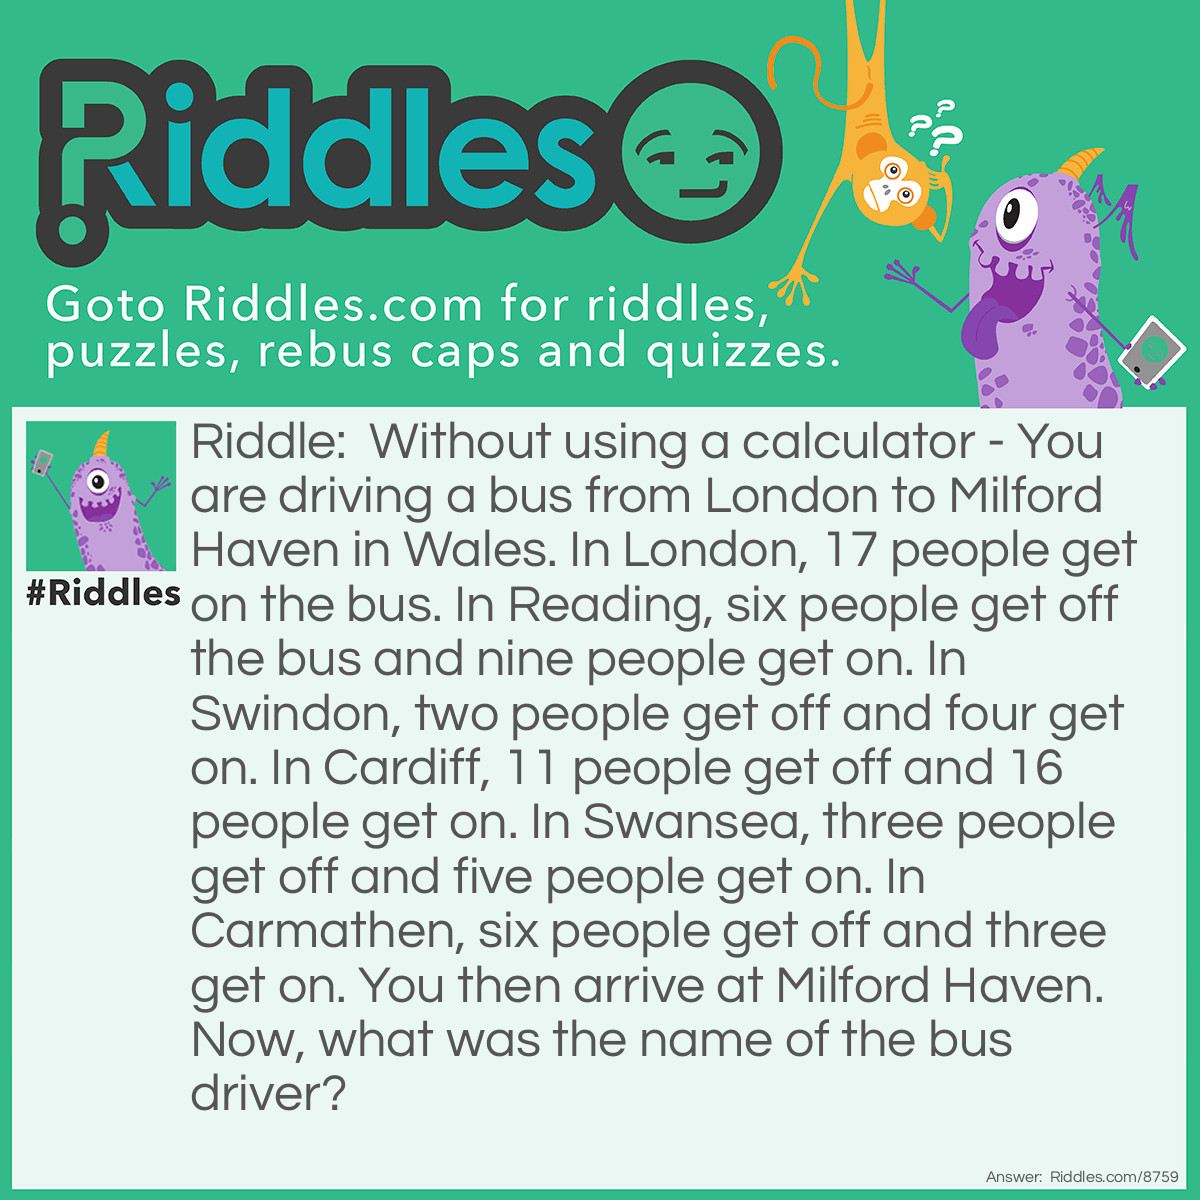 Riddle: Without using a calculator - You are driving a bus from London to Milford Haven in Wales. In London, 17 people get on the bus. In Reading, six people get off the bus and nine people get on. In Swindon, two people get off and four get on. In Cardiff, 11 people get off and 16 people get on. In Swansea, three people get off and five people get on. In Carmathen, six people get off and three get on. You then arrive at Milford Haven. Now, what was the name of the bus driver? Answer: You!